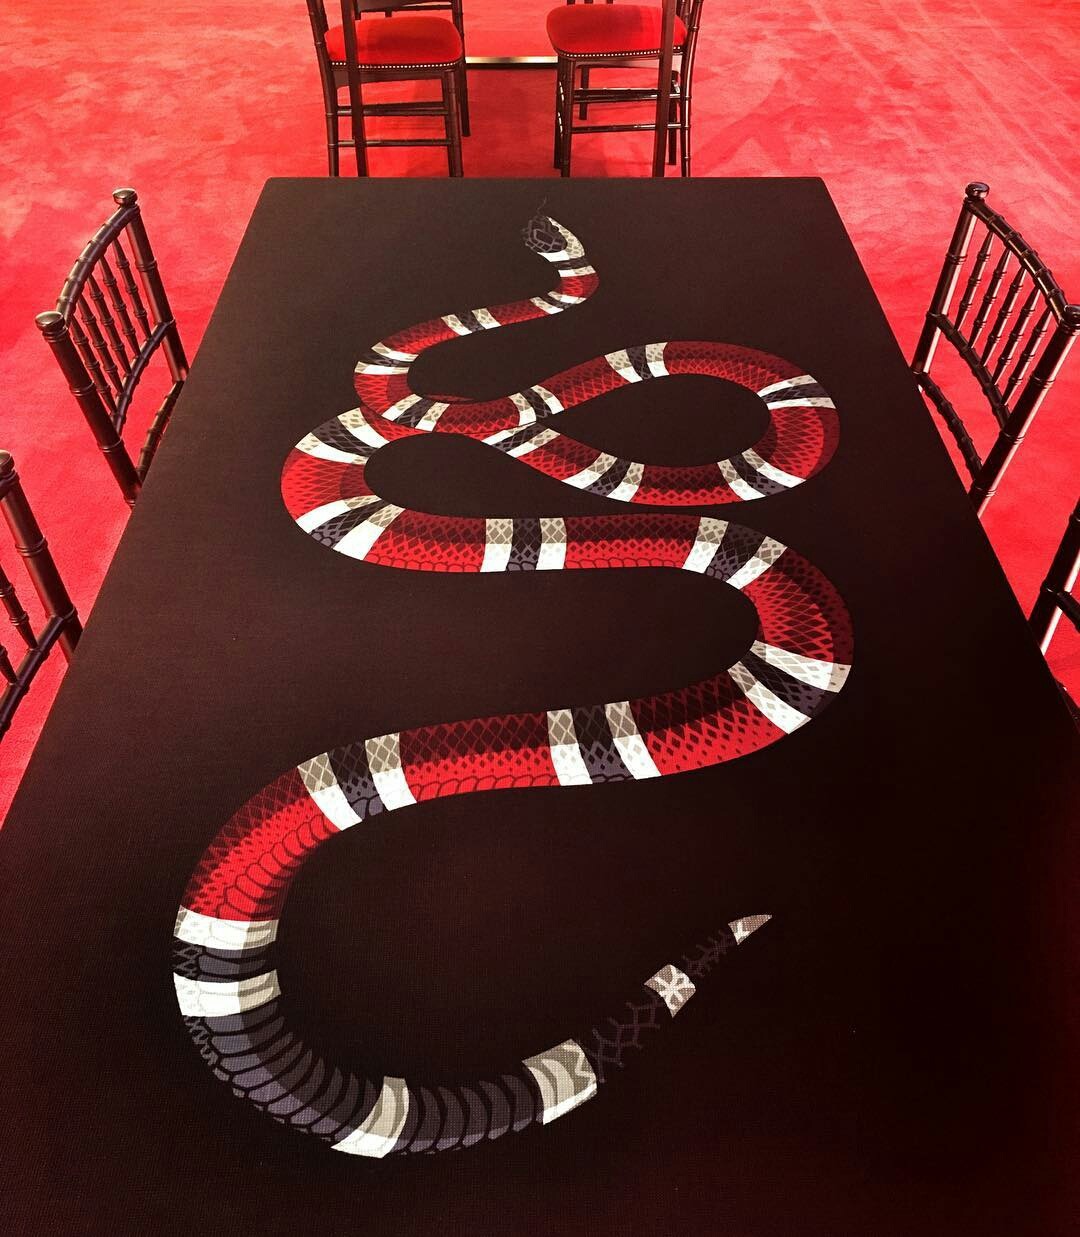 pic - table with a print of a snake on it